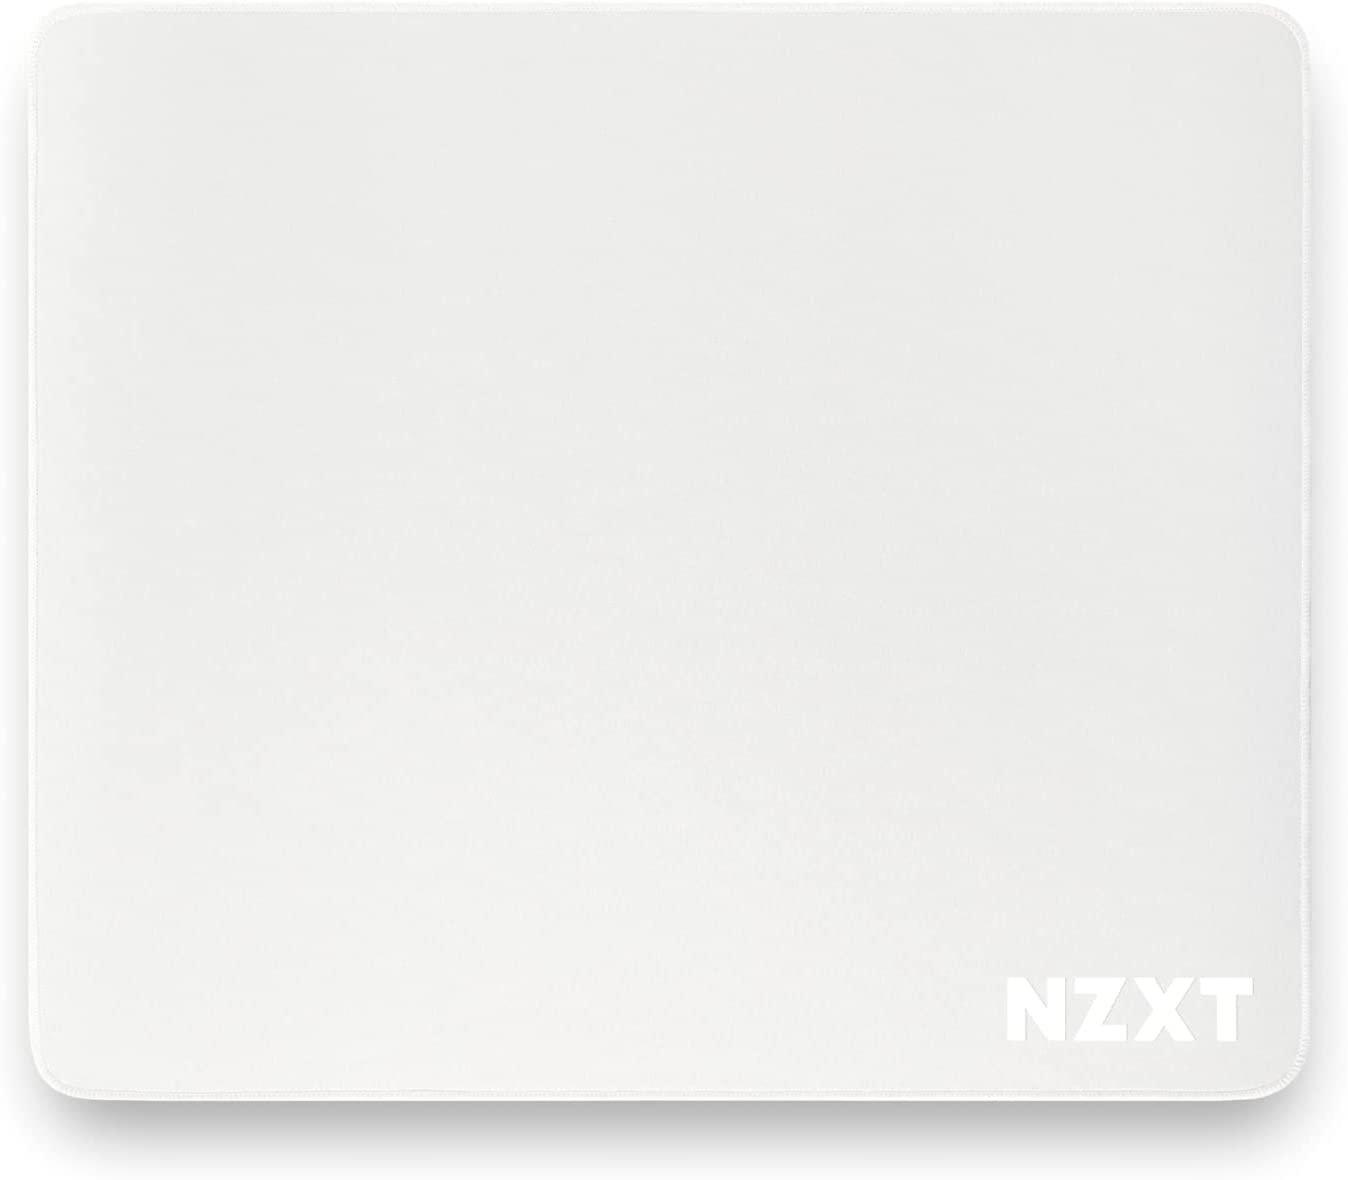 list item 2 of 3 NZXT MMP400 Standard Mouse Pad